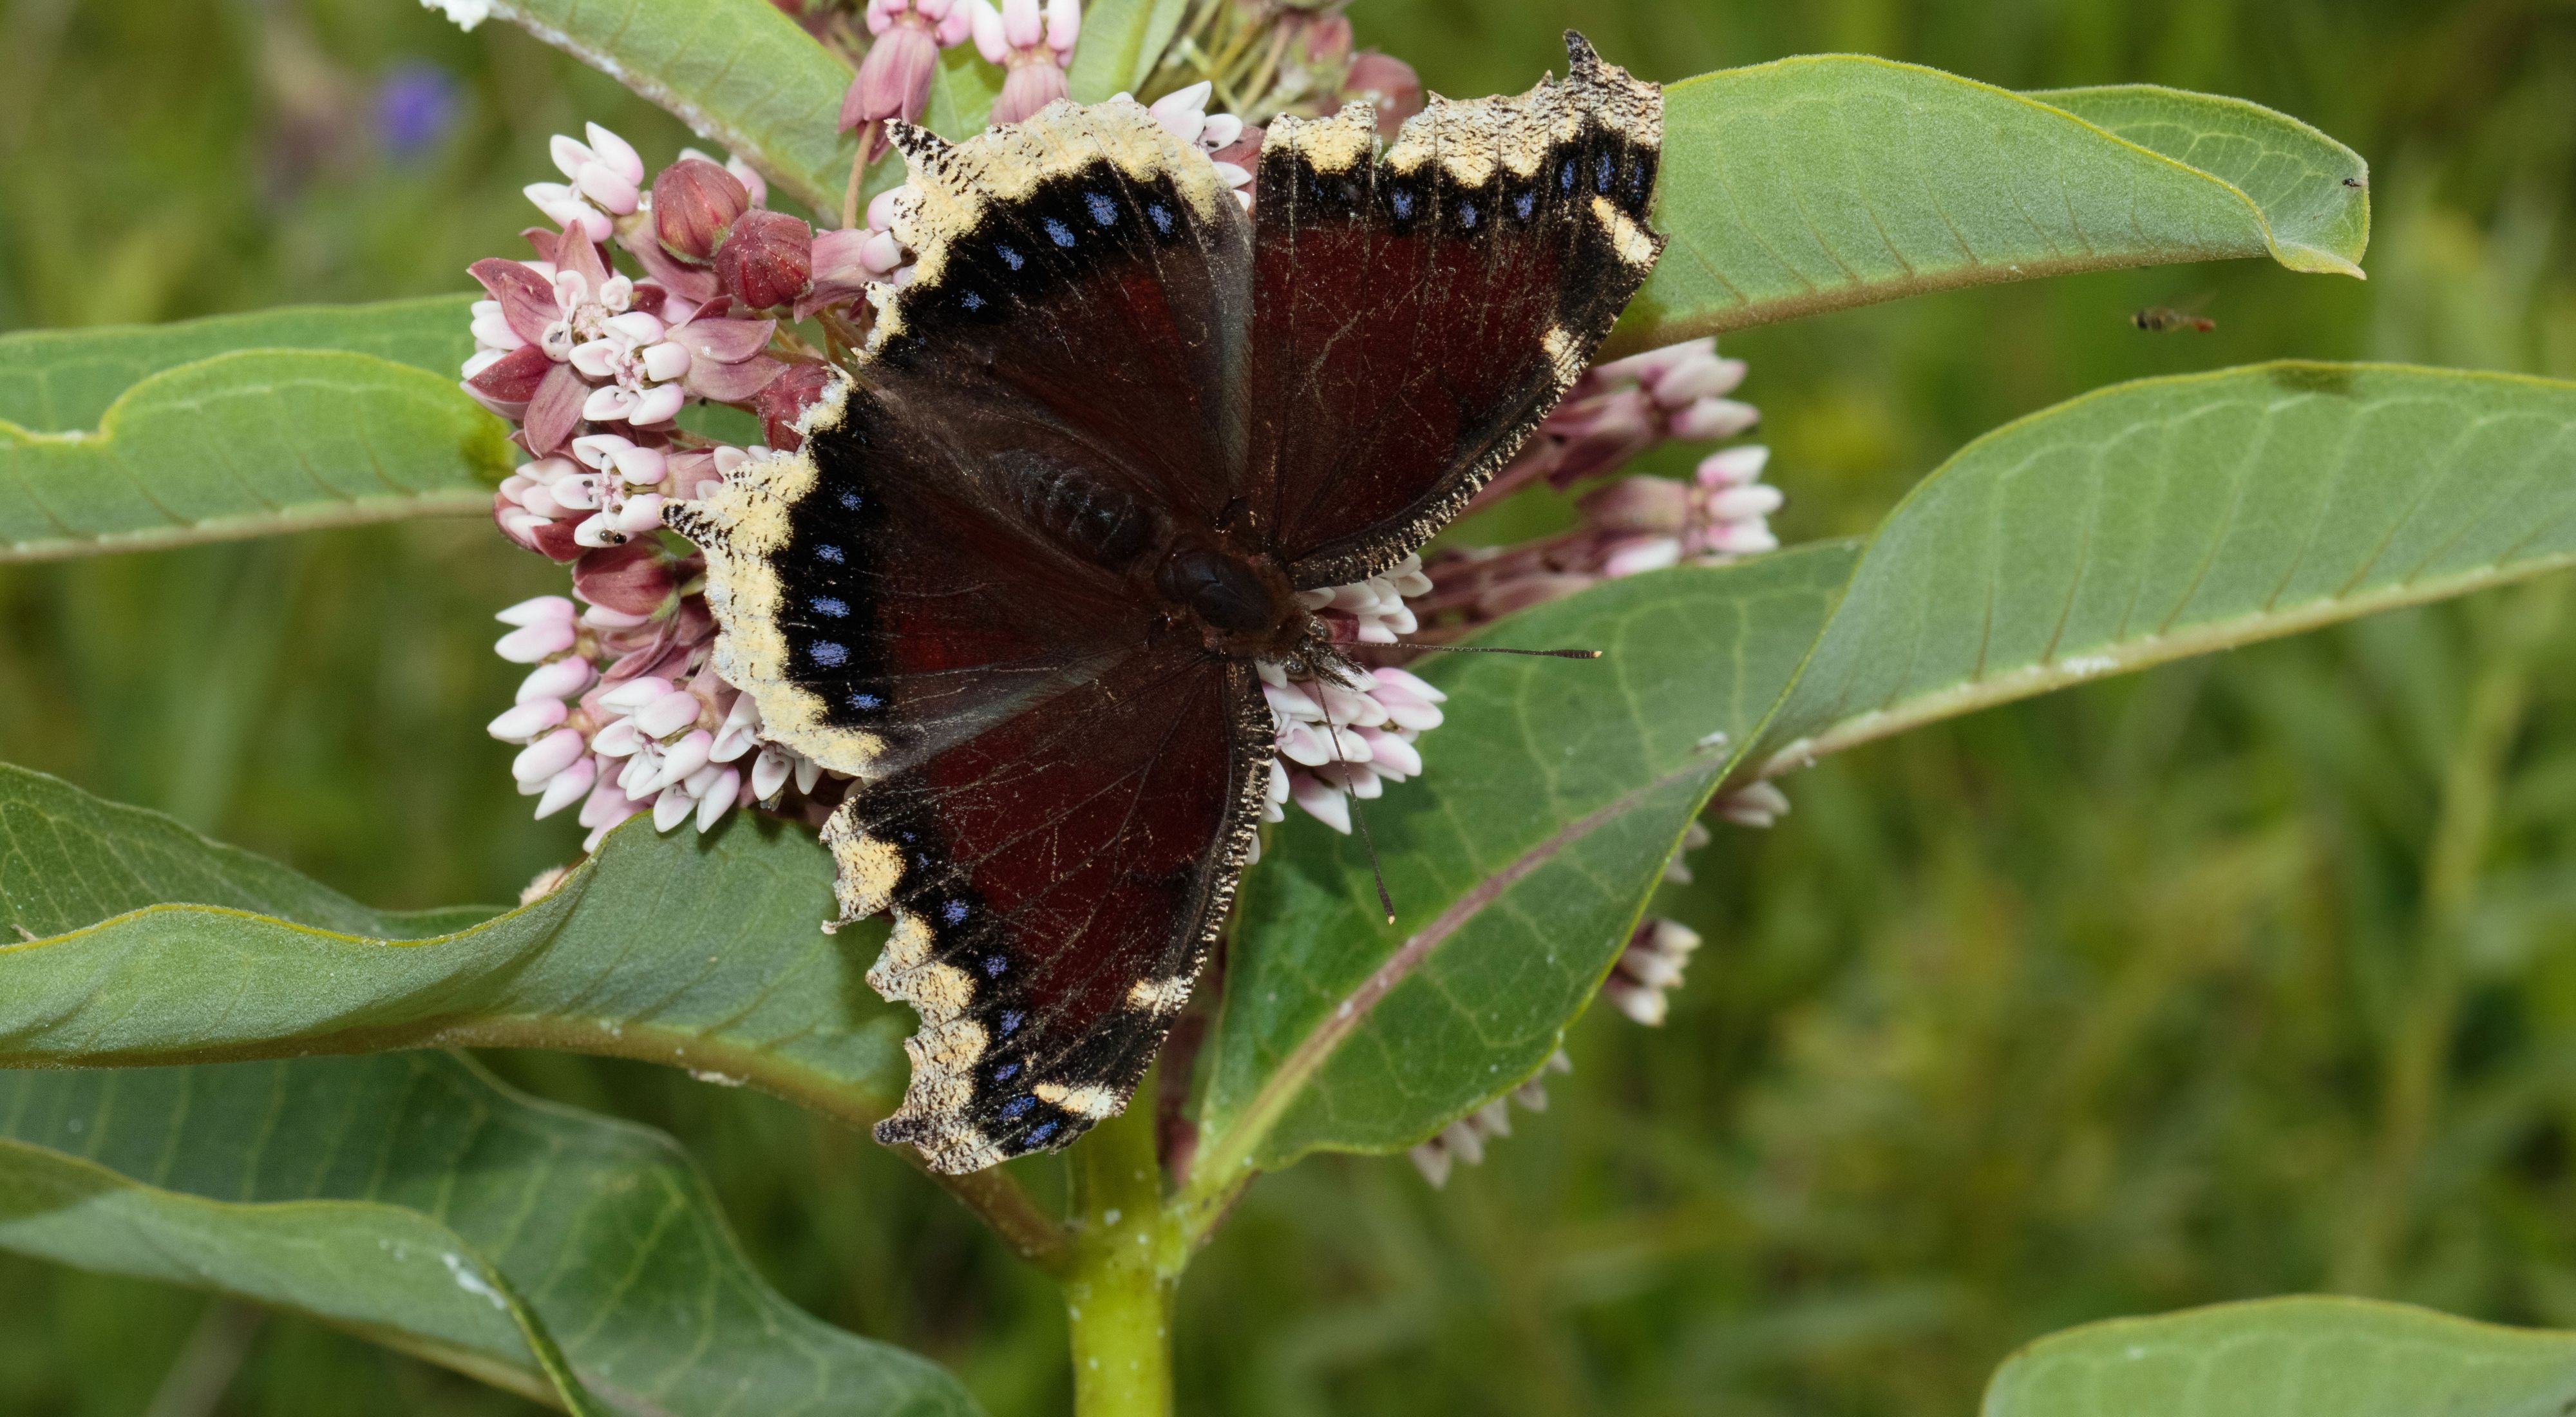 Dark-colored mourning cloak butterfly with outstretched wings on milkweed plant.